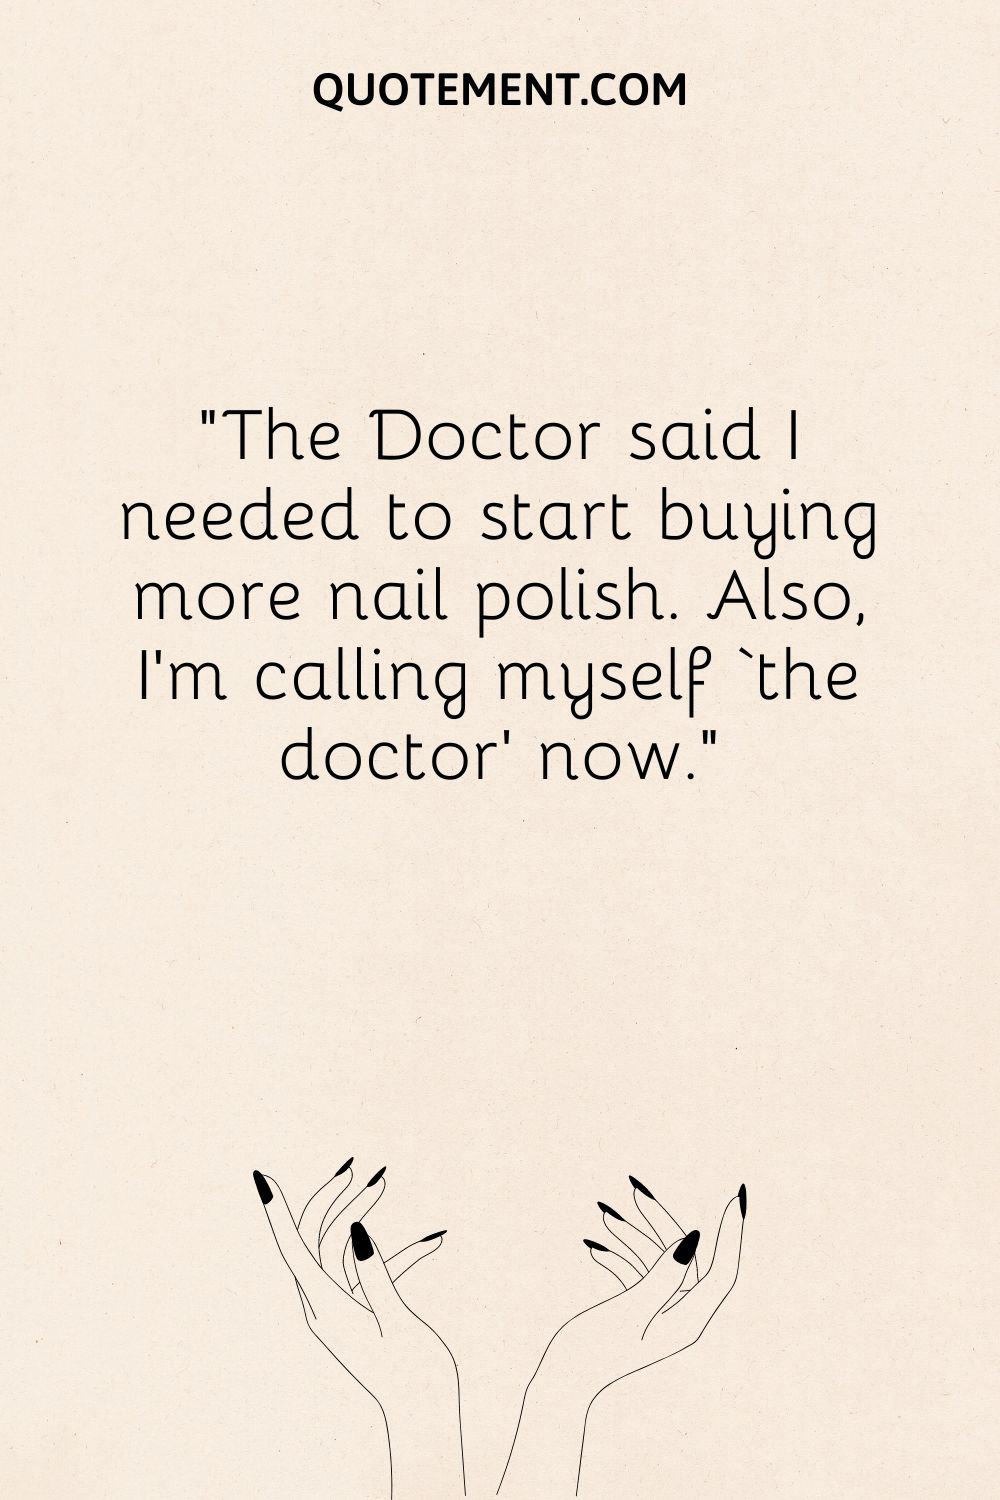 The Doctor said I needed to start buying more nail polish.